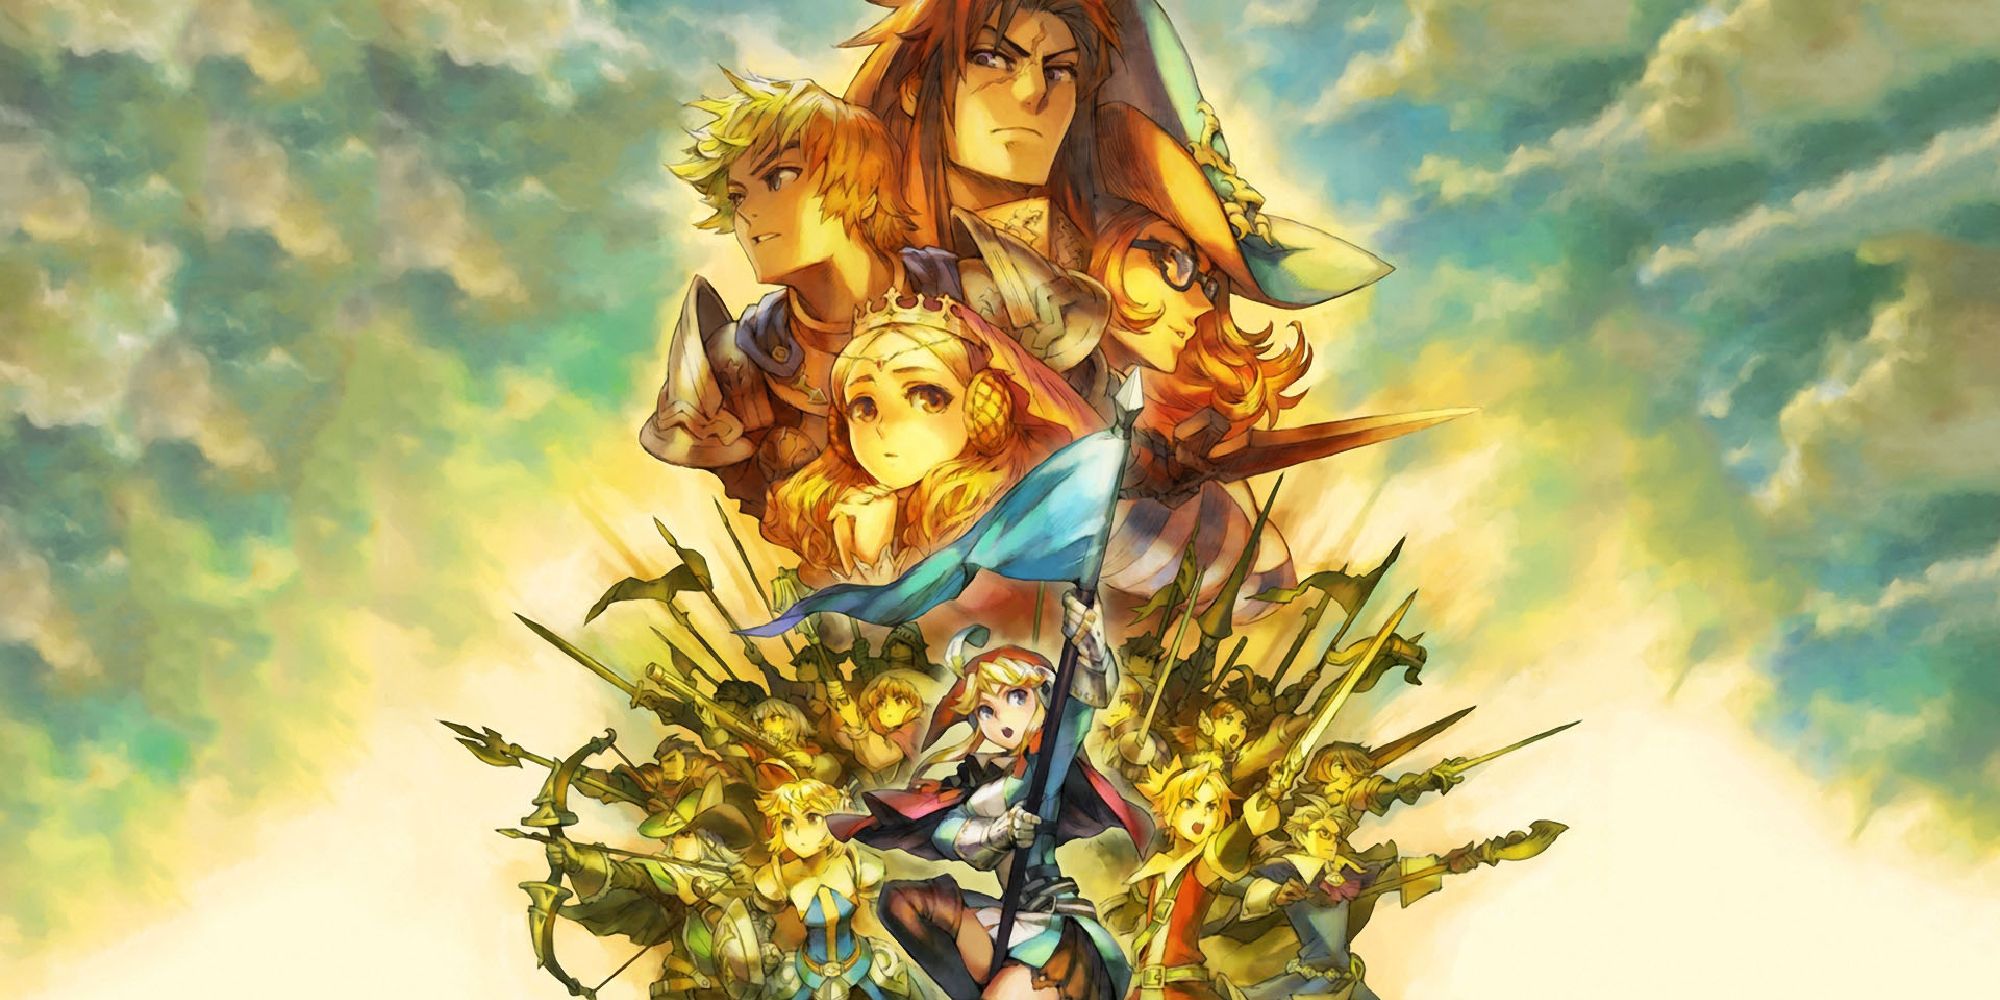 Key art for Vanillaware's Japan-exclusive PSP title Grand Knights History